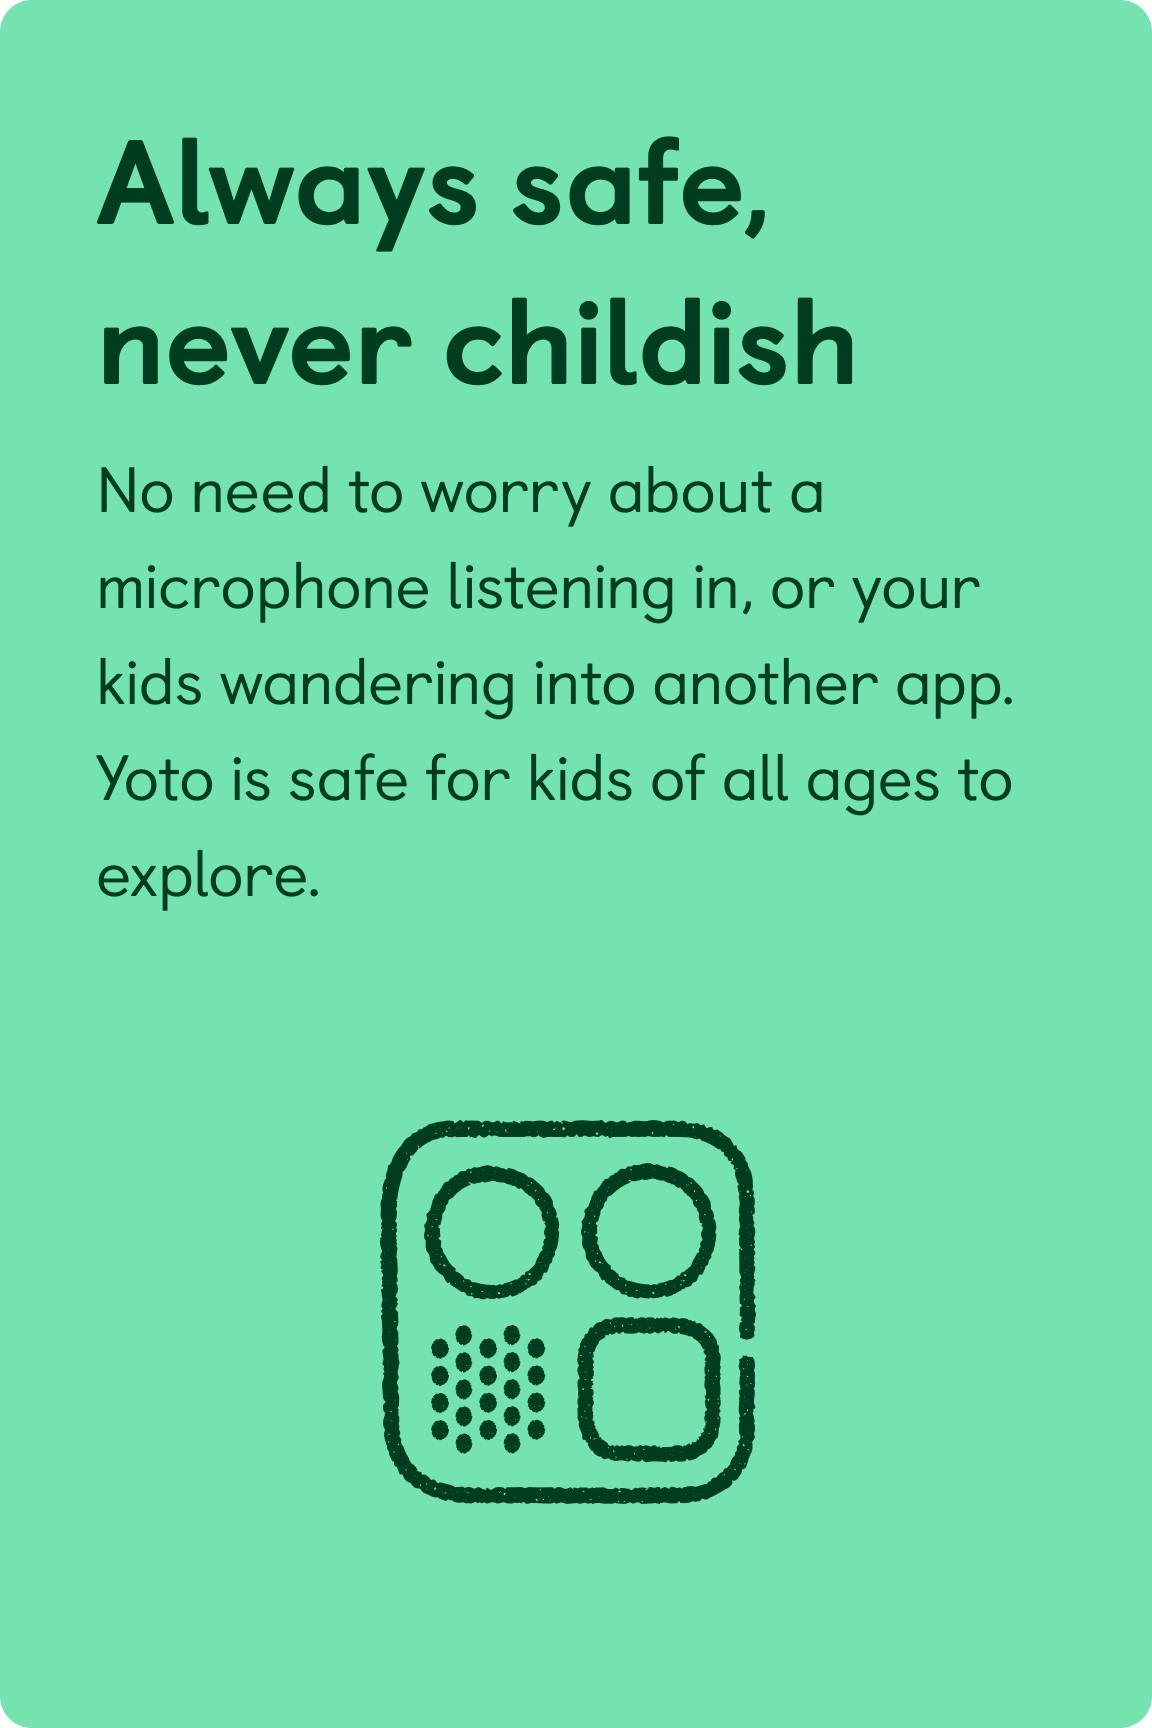 Always safe, never childish. No need to worry about a microphone listening in, or your kids wandering into another app. Yoto is safe for kids of all ages to explore.